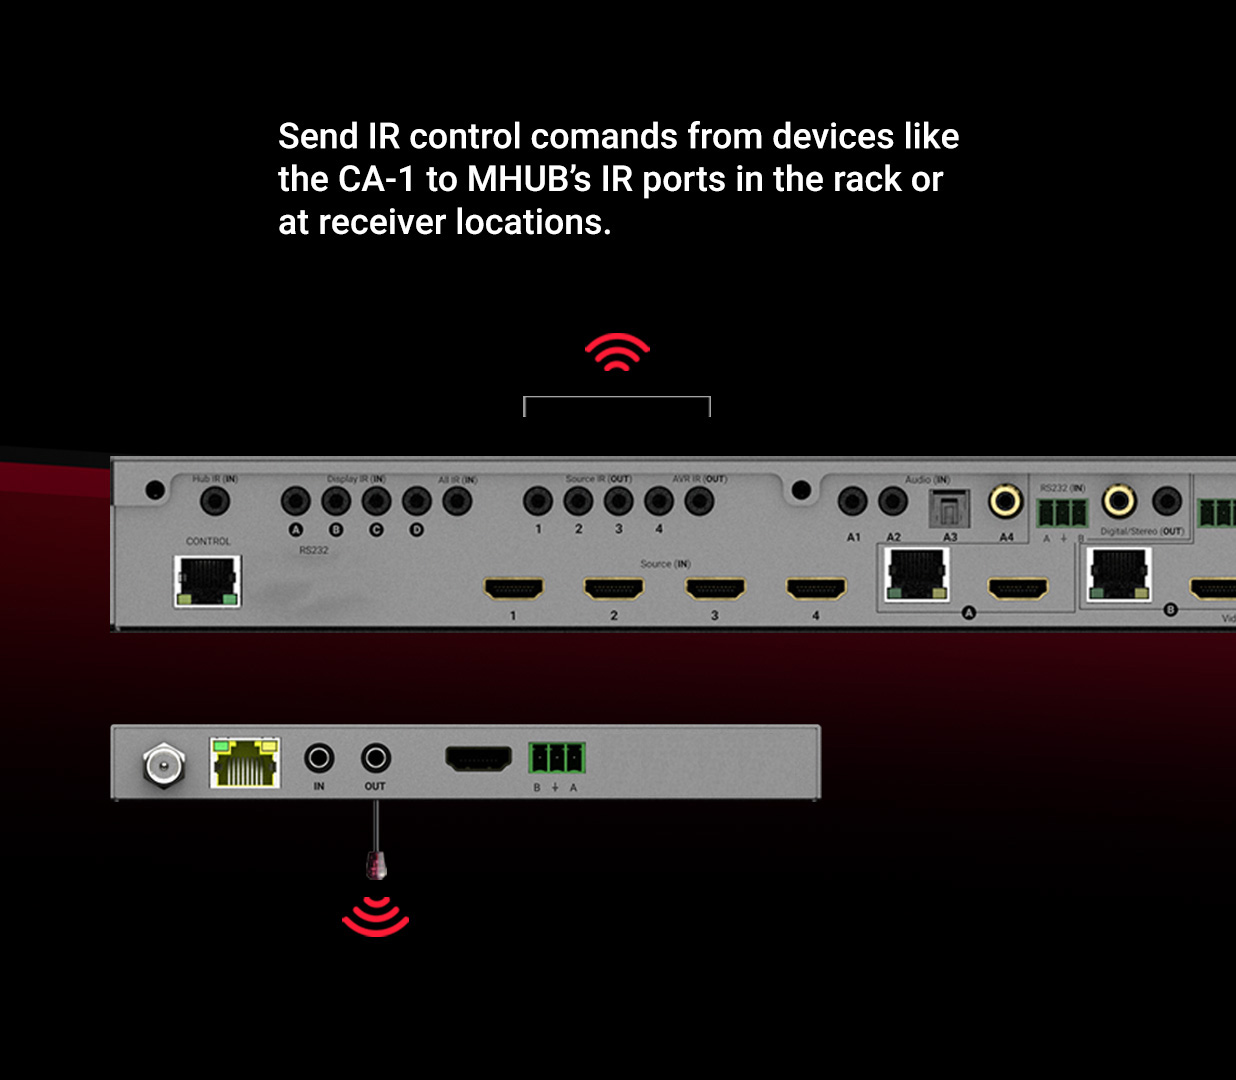 Our Control4 driver allows Control4 the ability to send IR commands directly to MHUB's IR ports